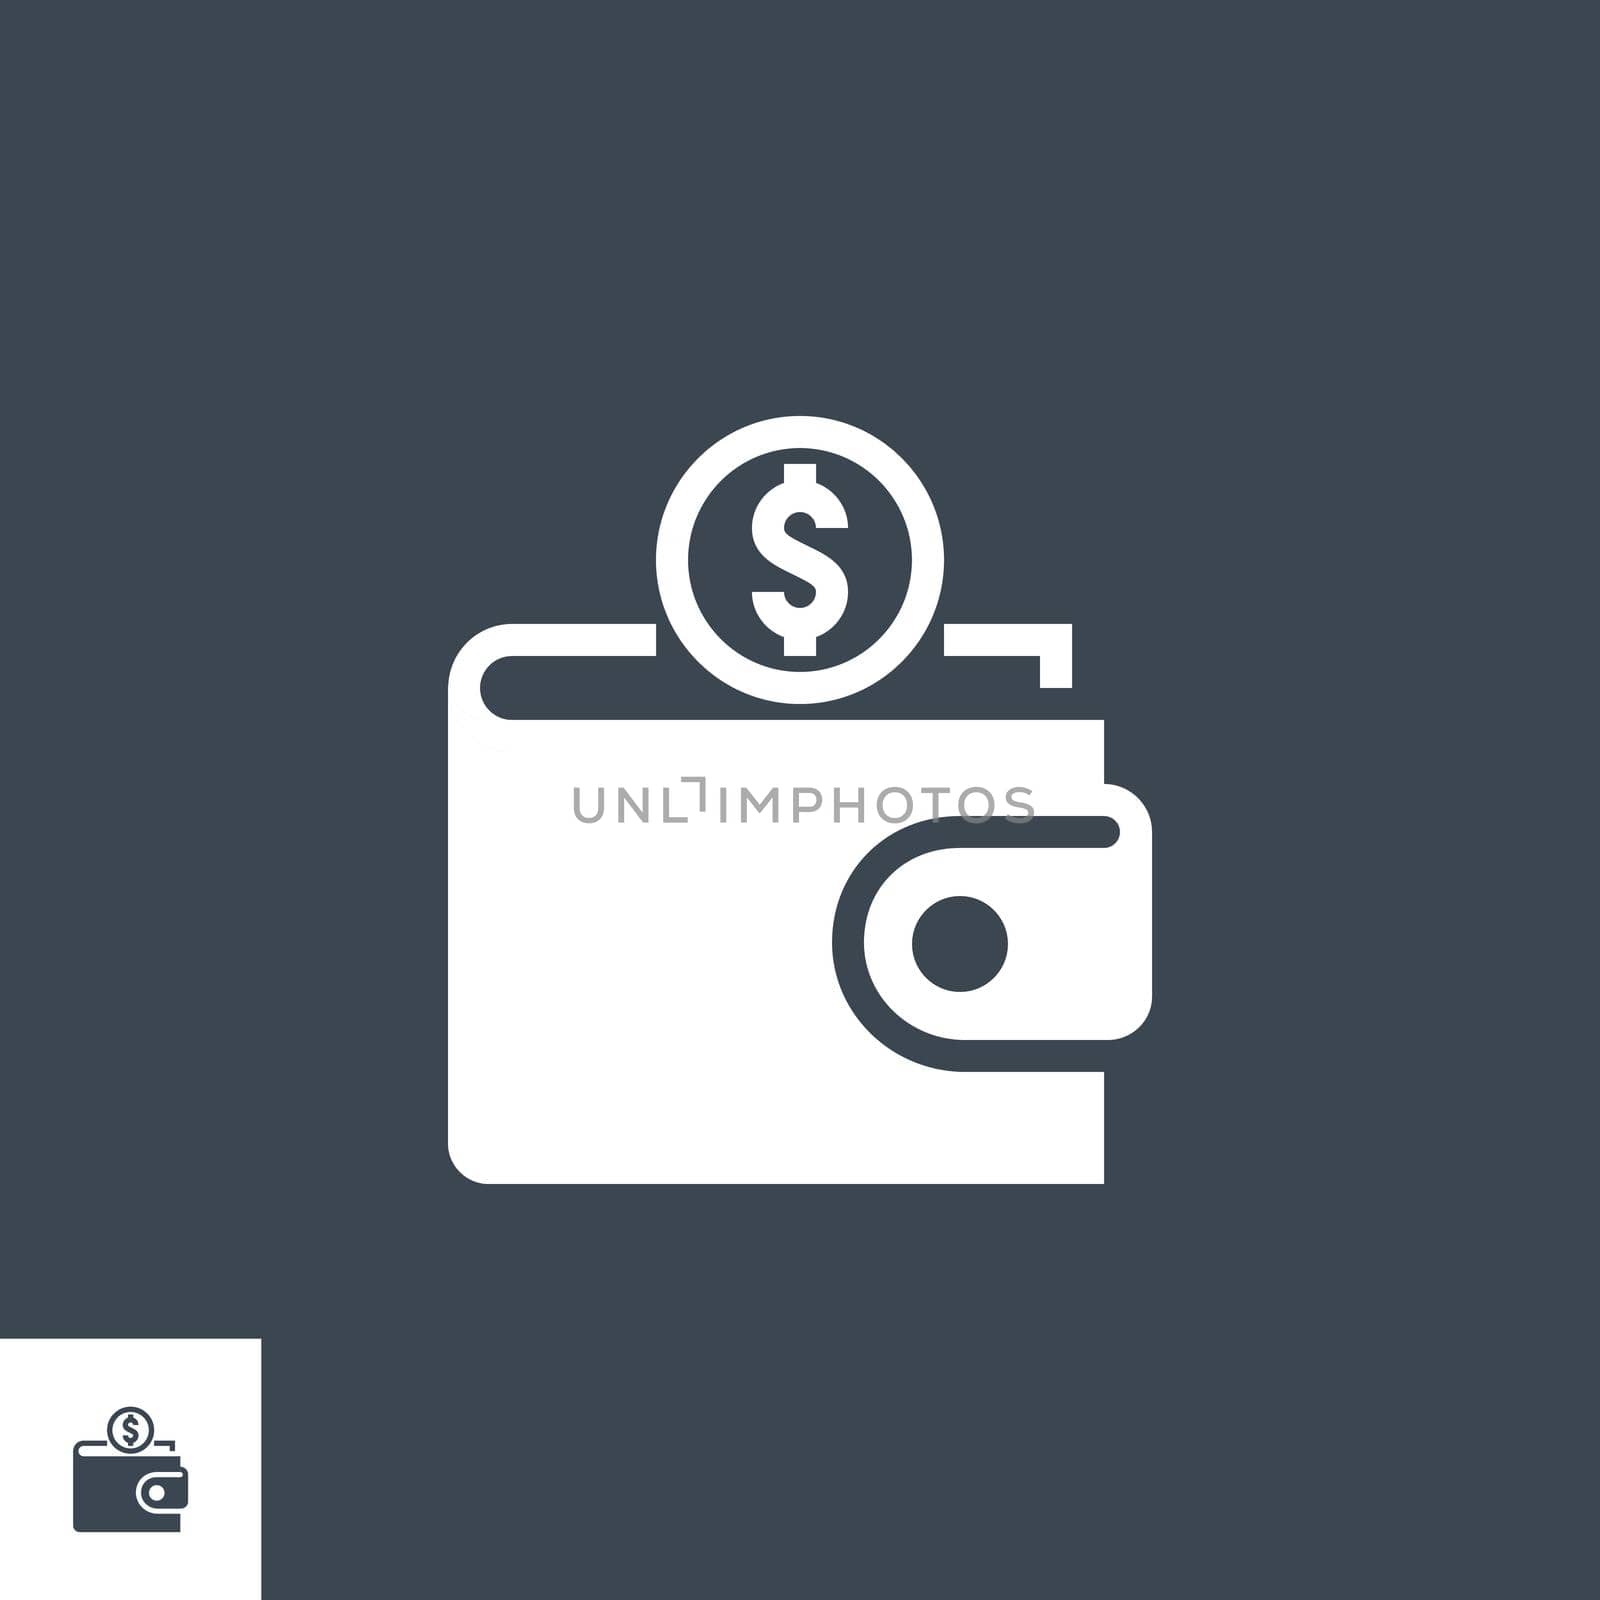 Personal Wallet related vector glyph icon. Isolated on black background. Vector illustration.